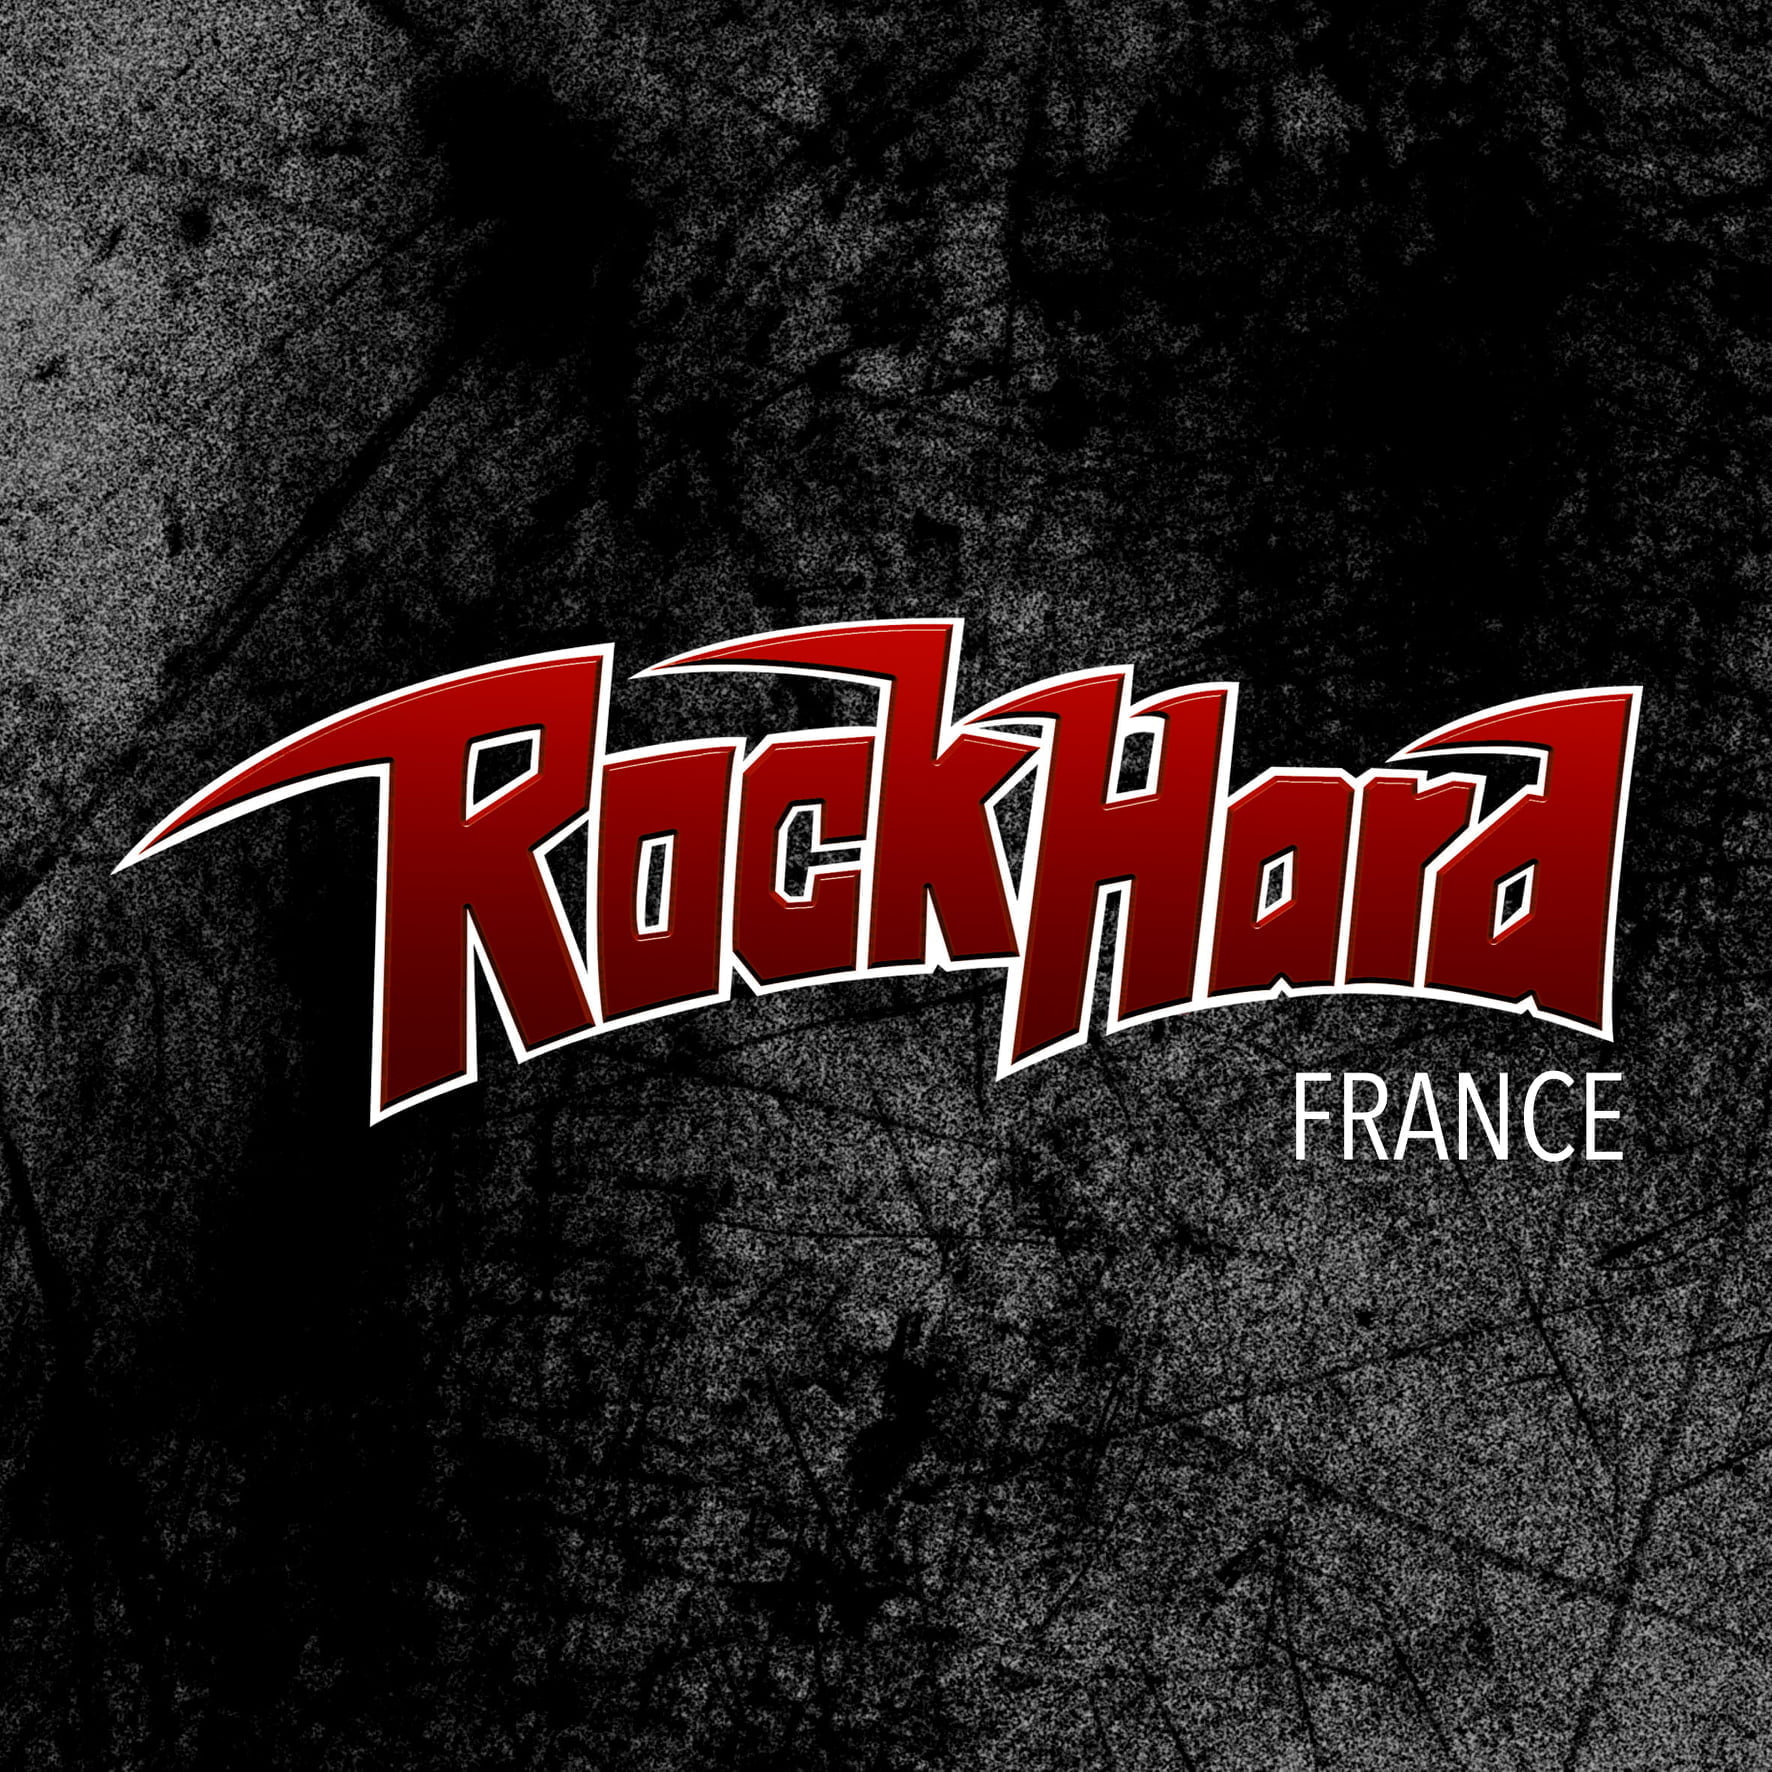 You are currently viewing Rock Hard France #215